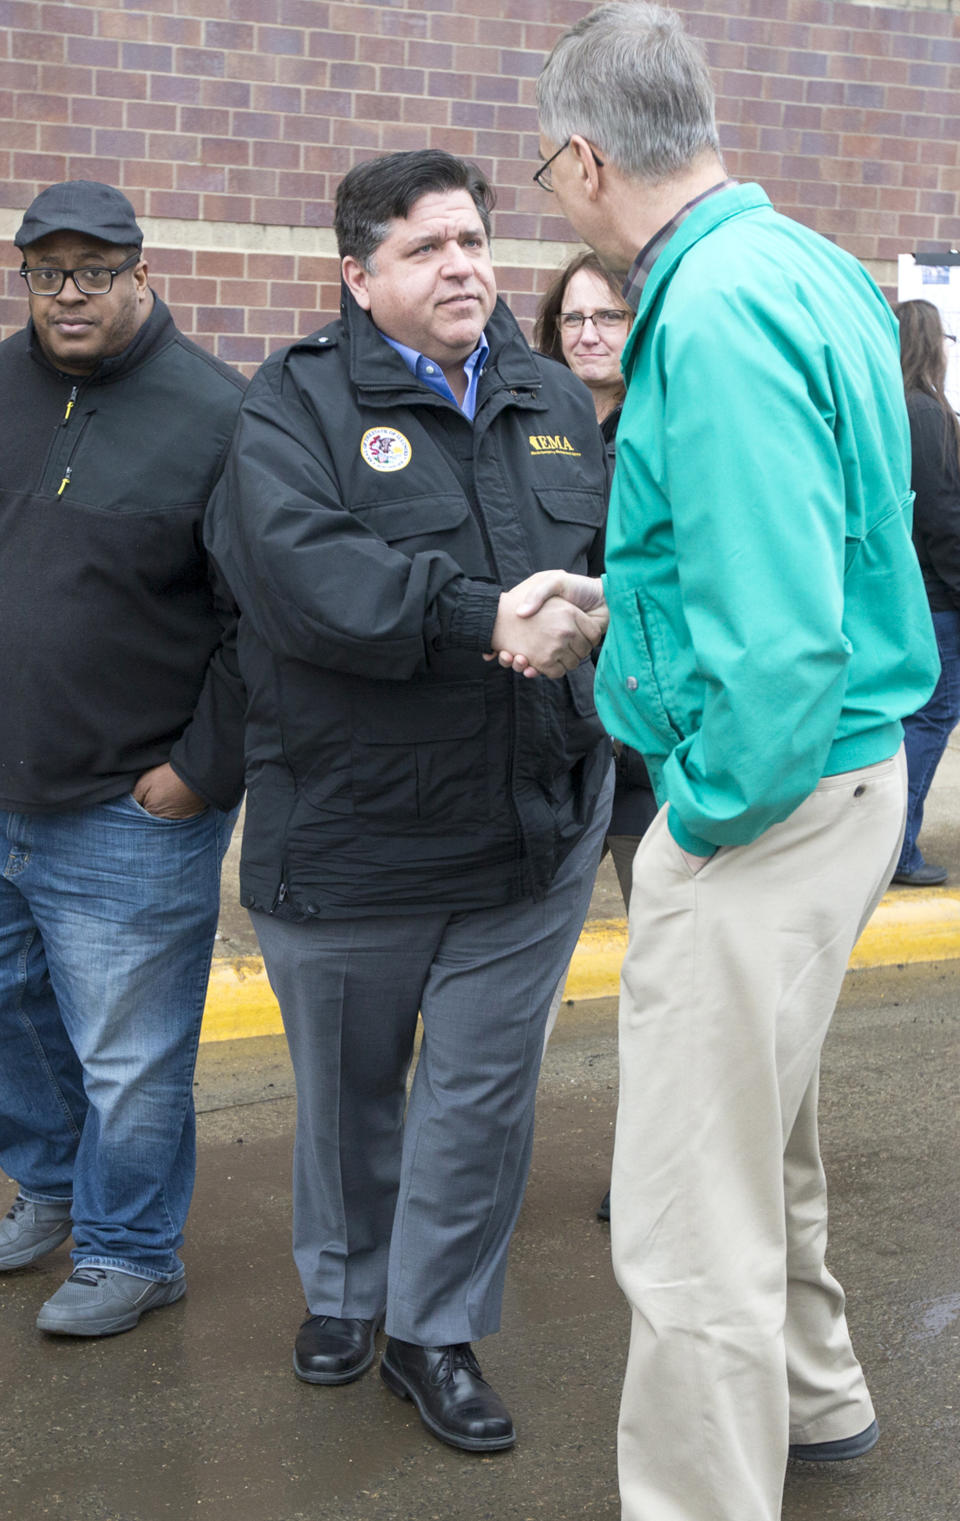 FILE--In this March 20, 2019 file photo, Gov. J.B. Pritzker, center, speaks with Bill Hadley, the Stephenson County Board Chairman, right, and Pastor Antwon Funches of St. Paul Missionary Baptist Church, left, during a stop to survey flood damage in Freeport, Ill. During his first six weeks in office, Pritzker’s appointment calendar includes 70 “attire” recommendations for events as varied as bill signings, a state police officer’s funeral, a White House dinner, surveying flood damage, and cocktails with legislators at the Illinois Governor’s Mansion. (Scott P. Yates/Rockford Register Star via AP, File)